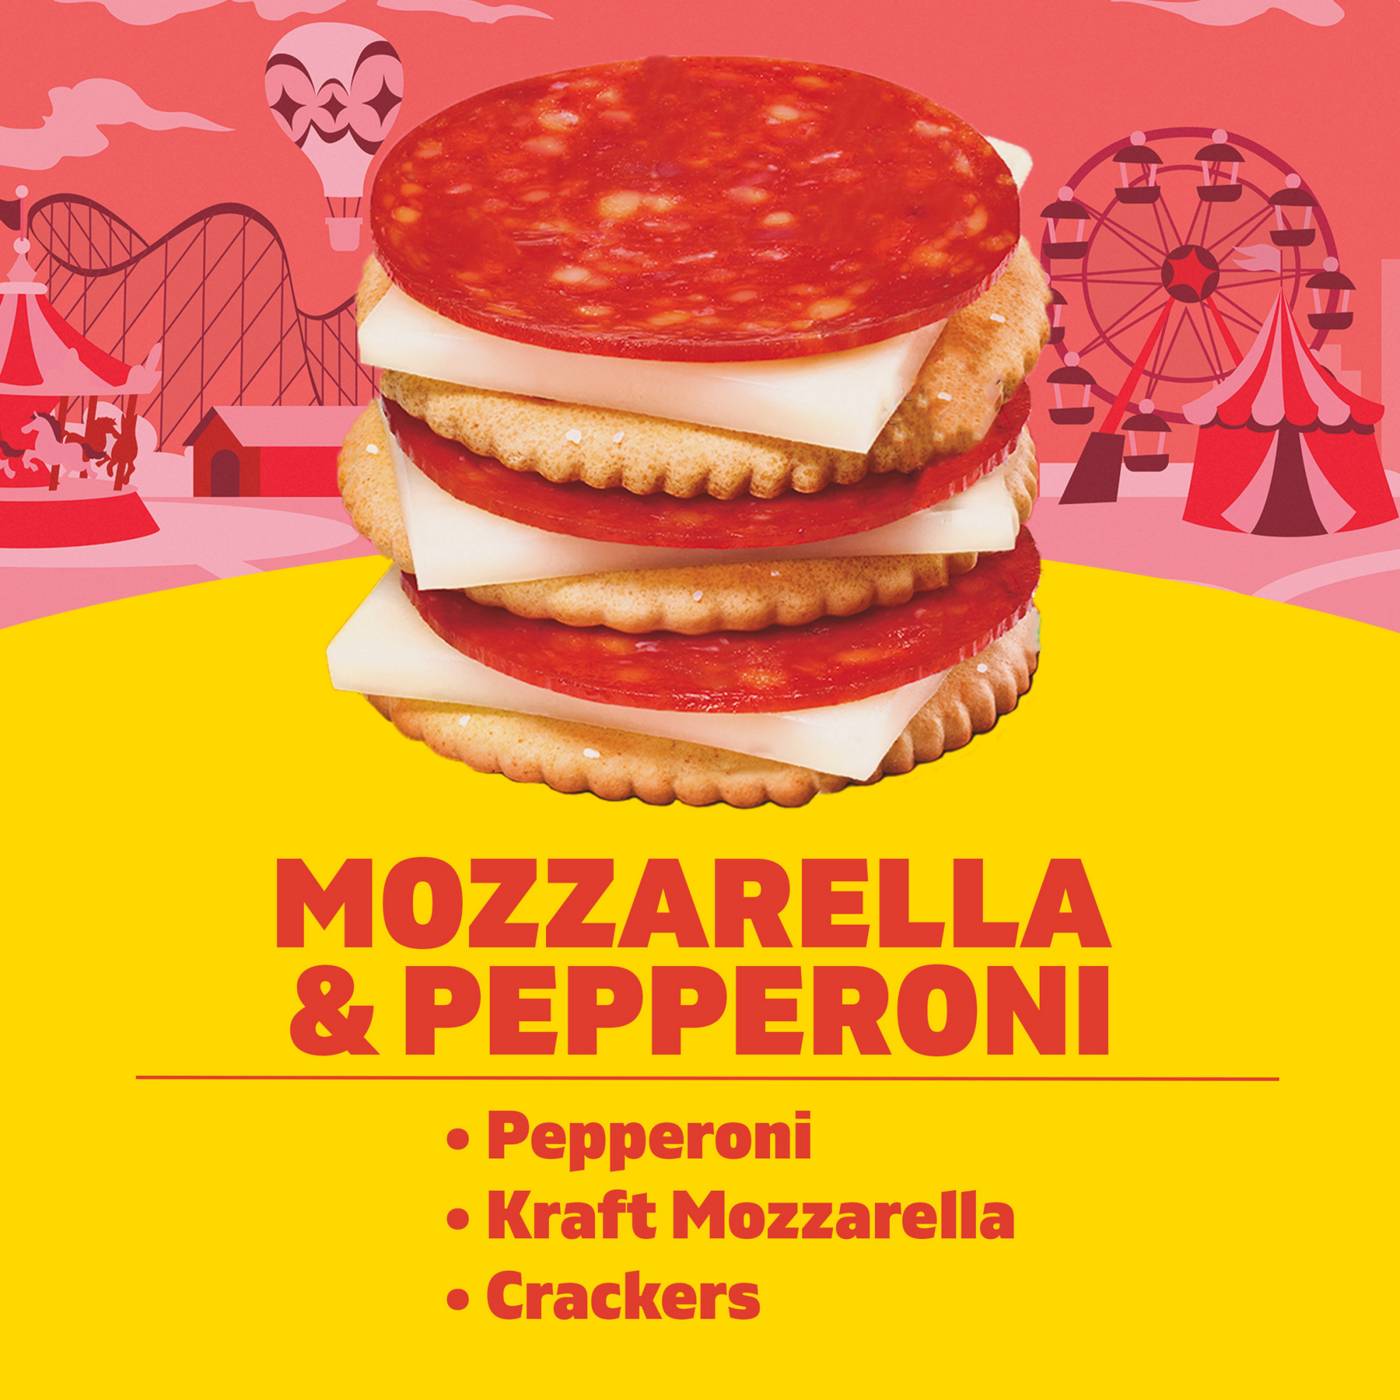 Lunchables Snack Kit Tray - Mozzarella & Pepperoni with Crackers; image 6 of 6